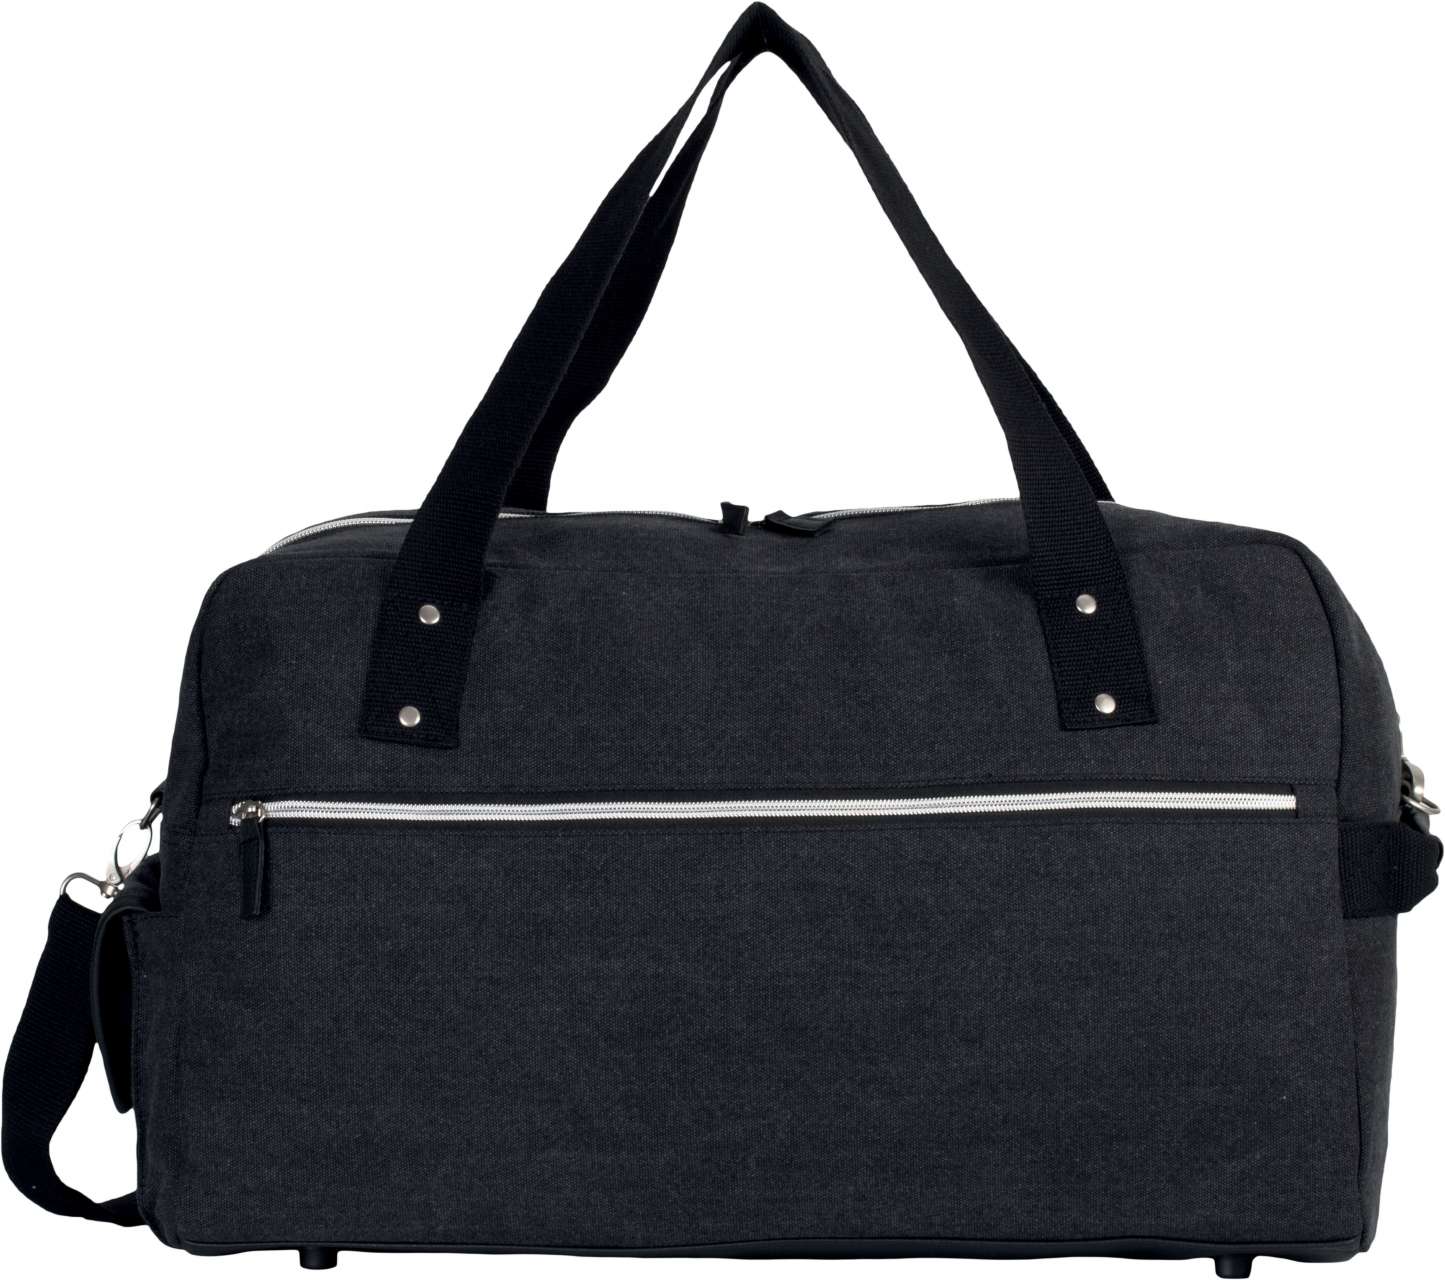 TRAVEL BAG IN COTTON CANVAS